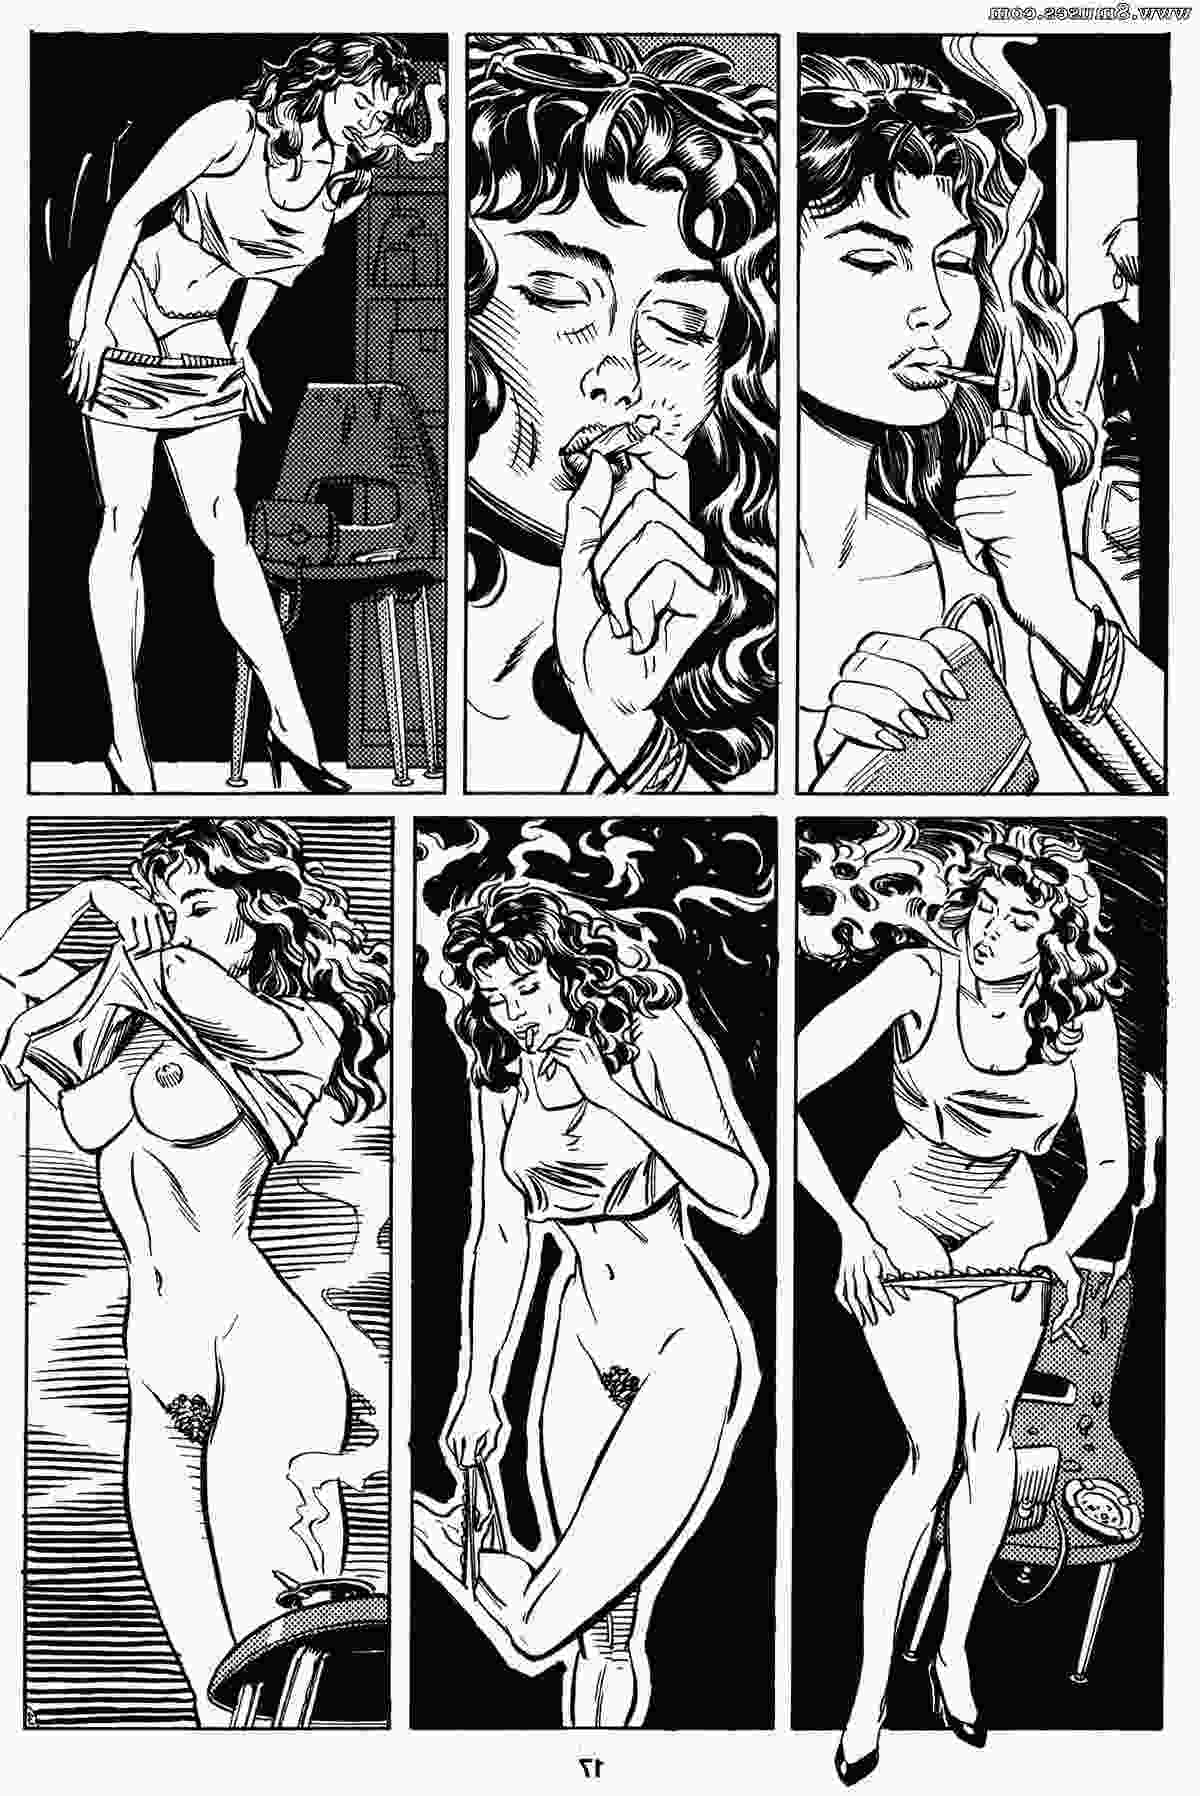 EROS-Comics/Real-Smut Real_Smut__8muses_-_Sex_and_Porn_Comics_19.jpg